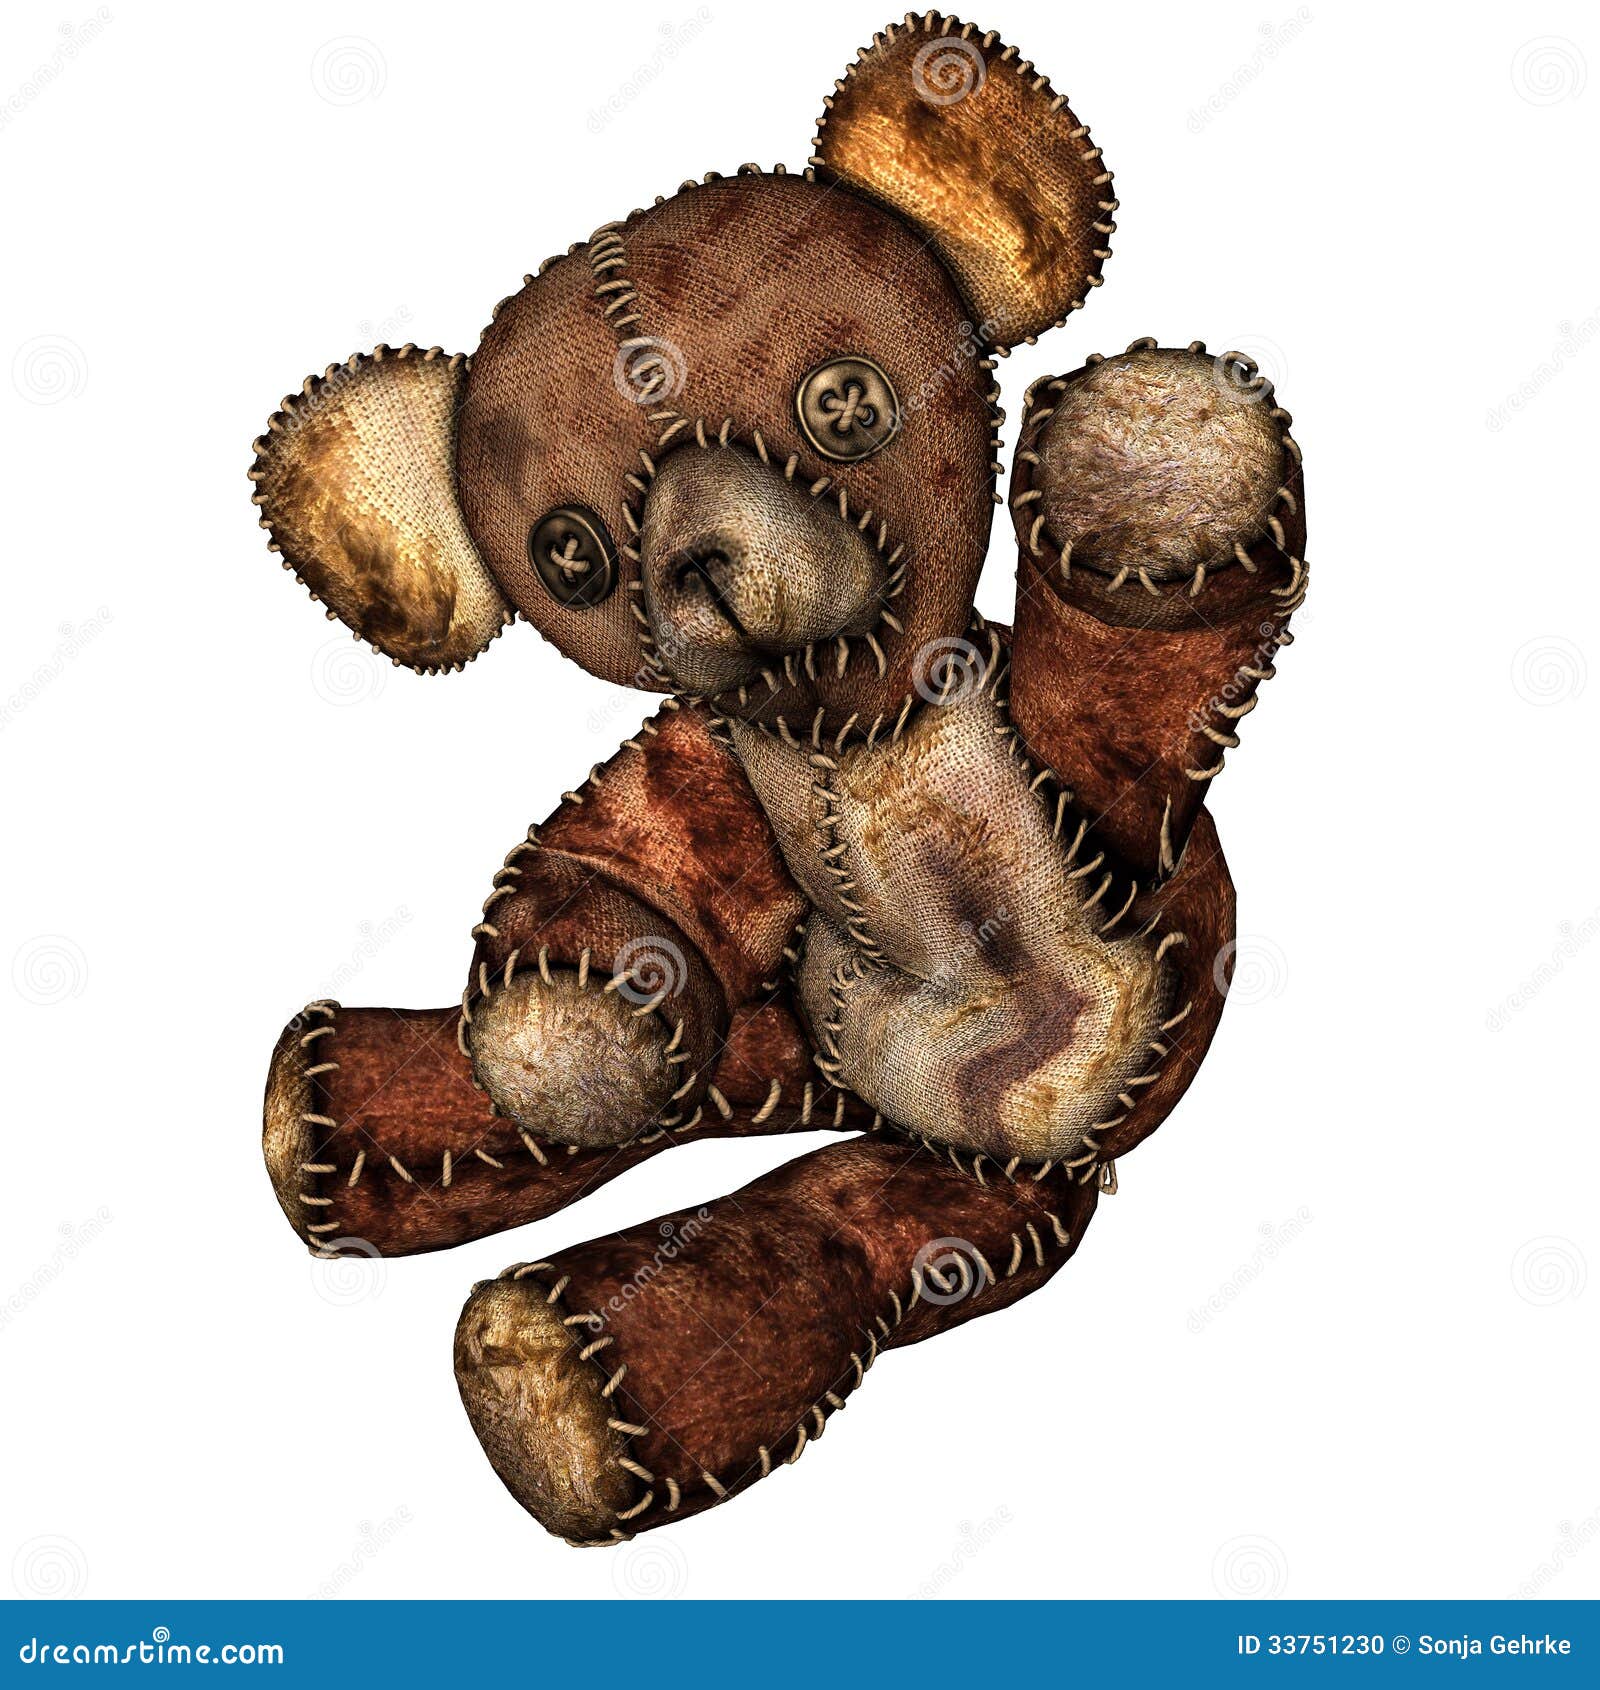 Old Teddy Bear with Button Eyes Stock Illustration - Illustration